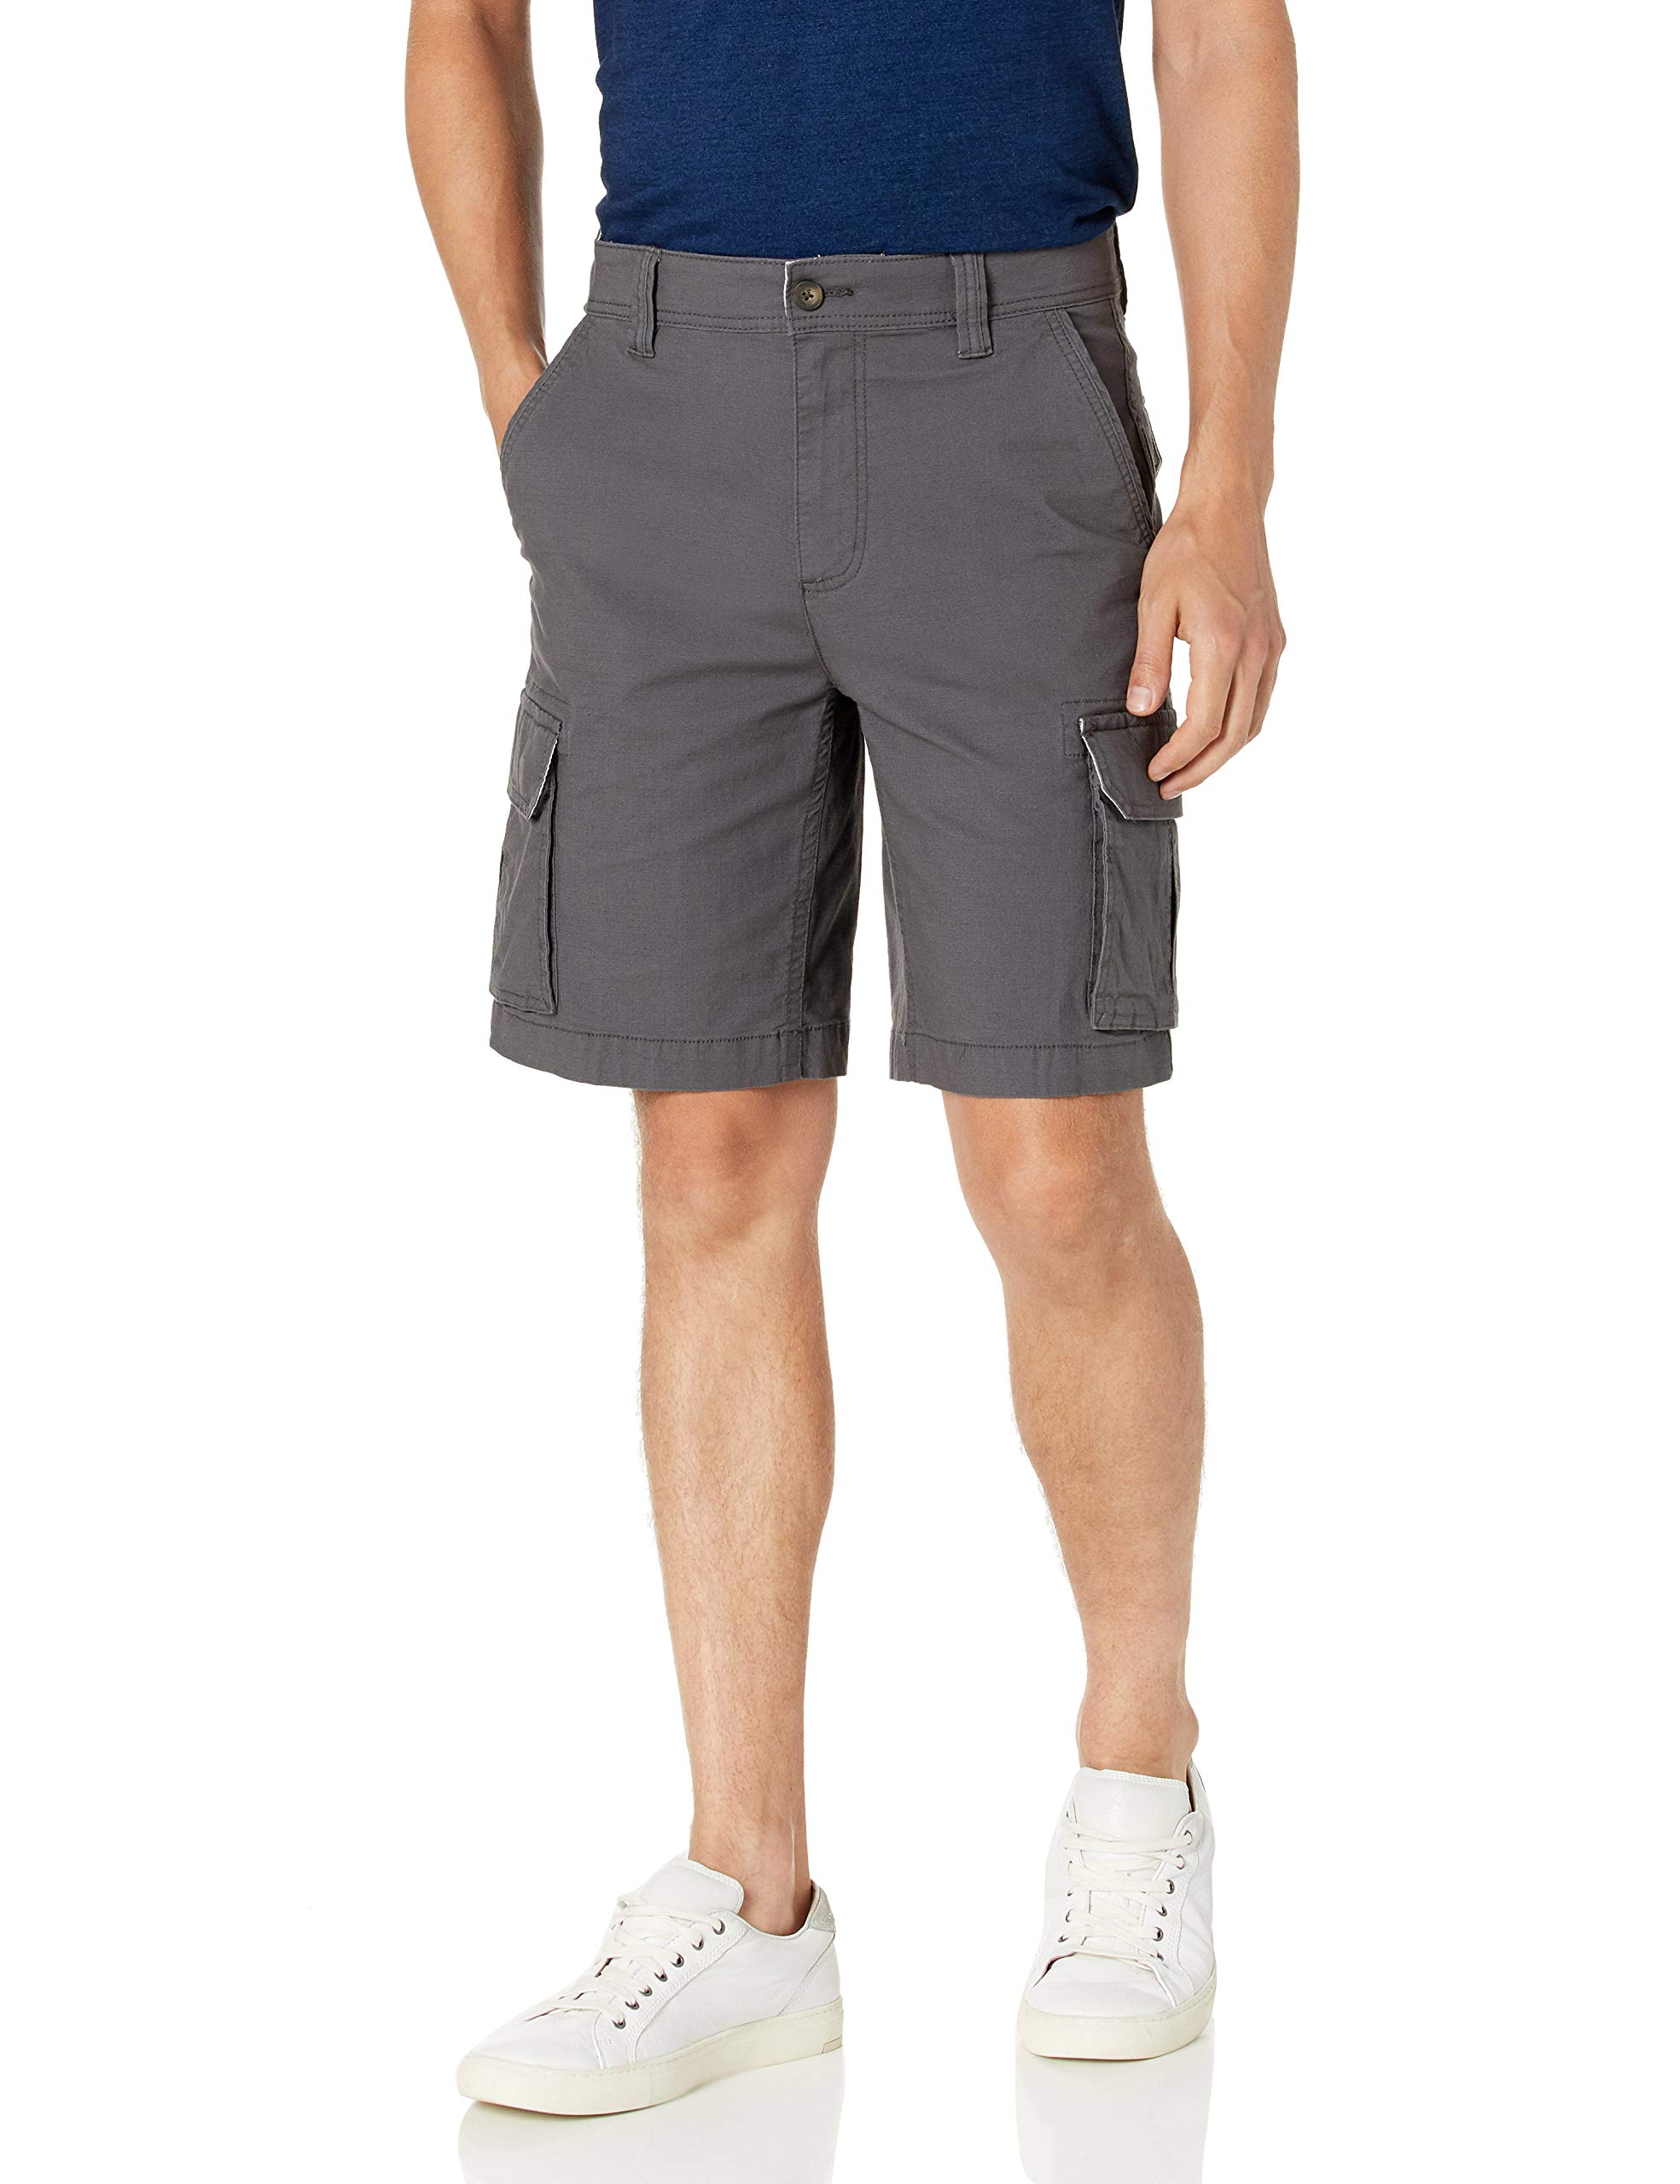 Amazon Essentials Men's 10” Lightweight Ripstop Stretch Cargo Short (Dark Grey) $7.40 + Free Shipping w/ Prime or on orders over $35